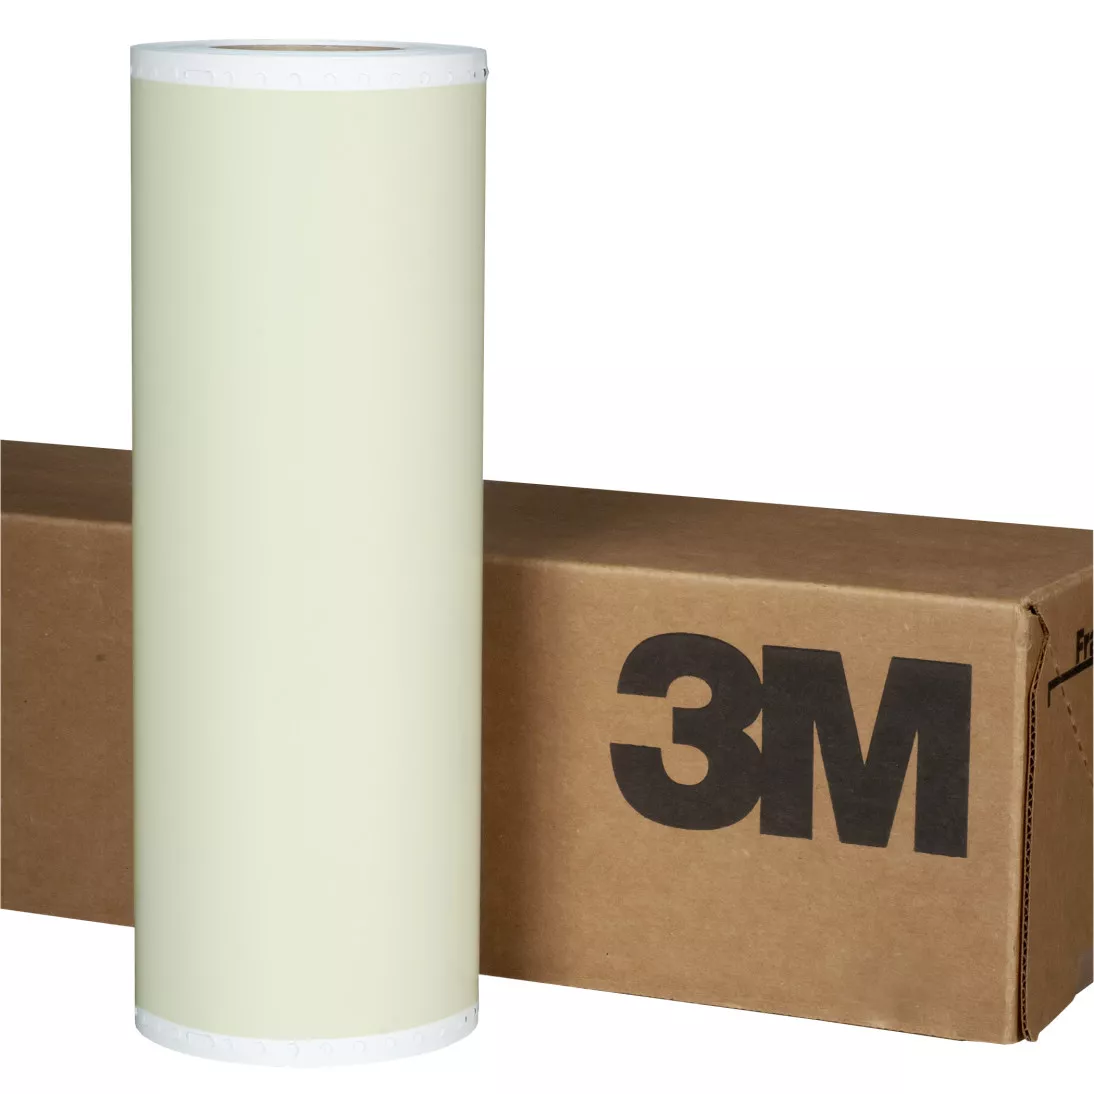 3M™ Scotchcal™ ElectroCut™ Graphic Film 7125-90, Antique White, 24 in x
50 yd